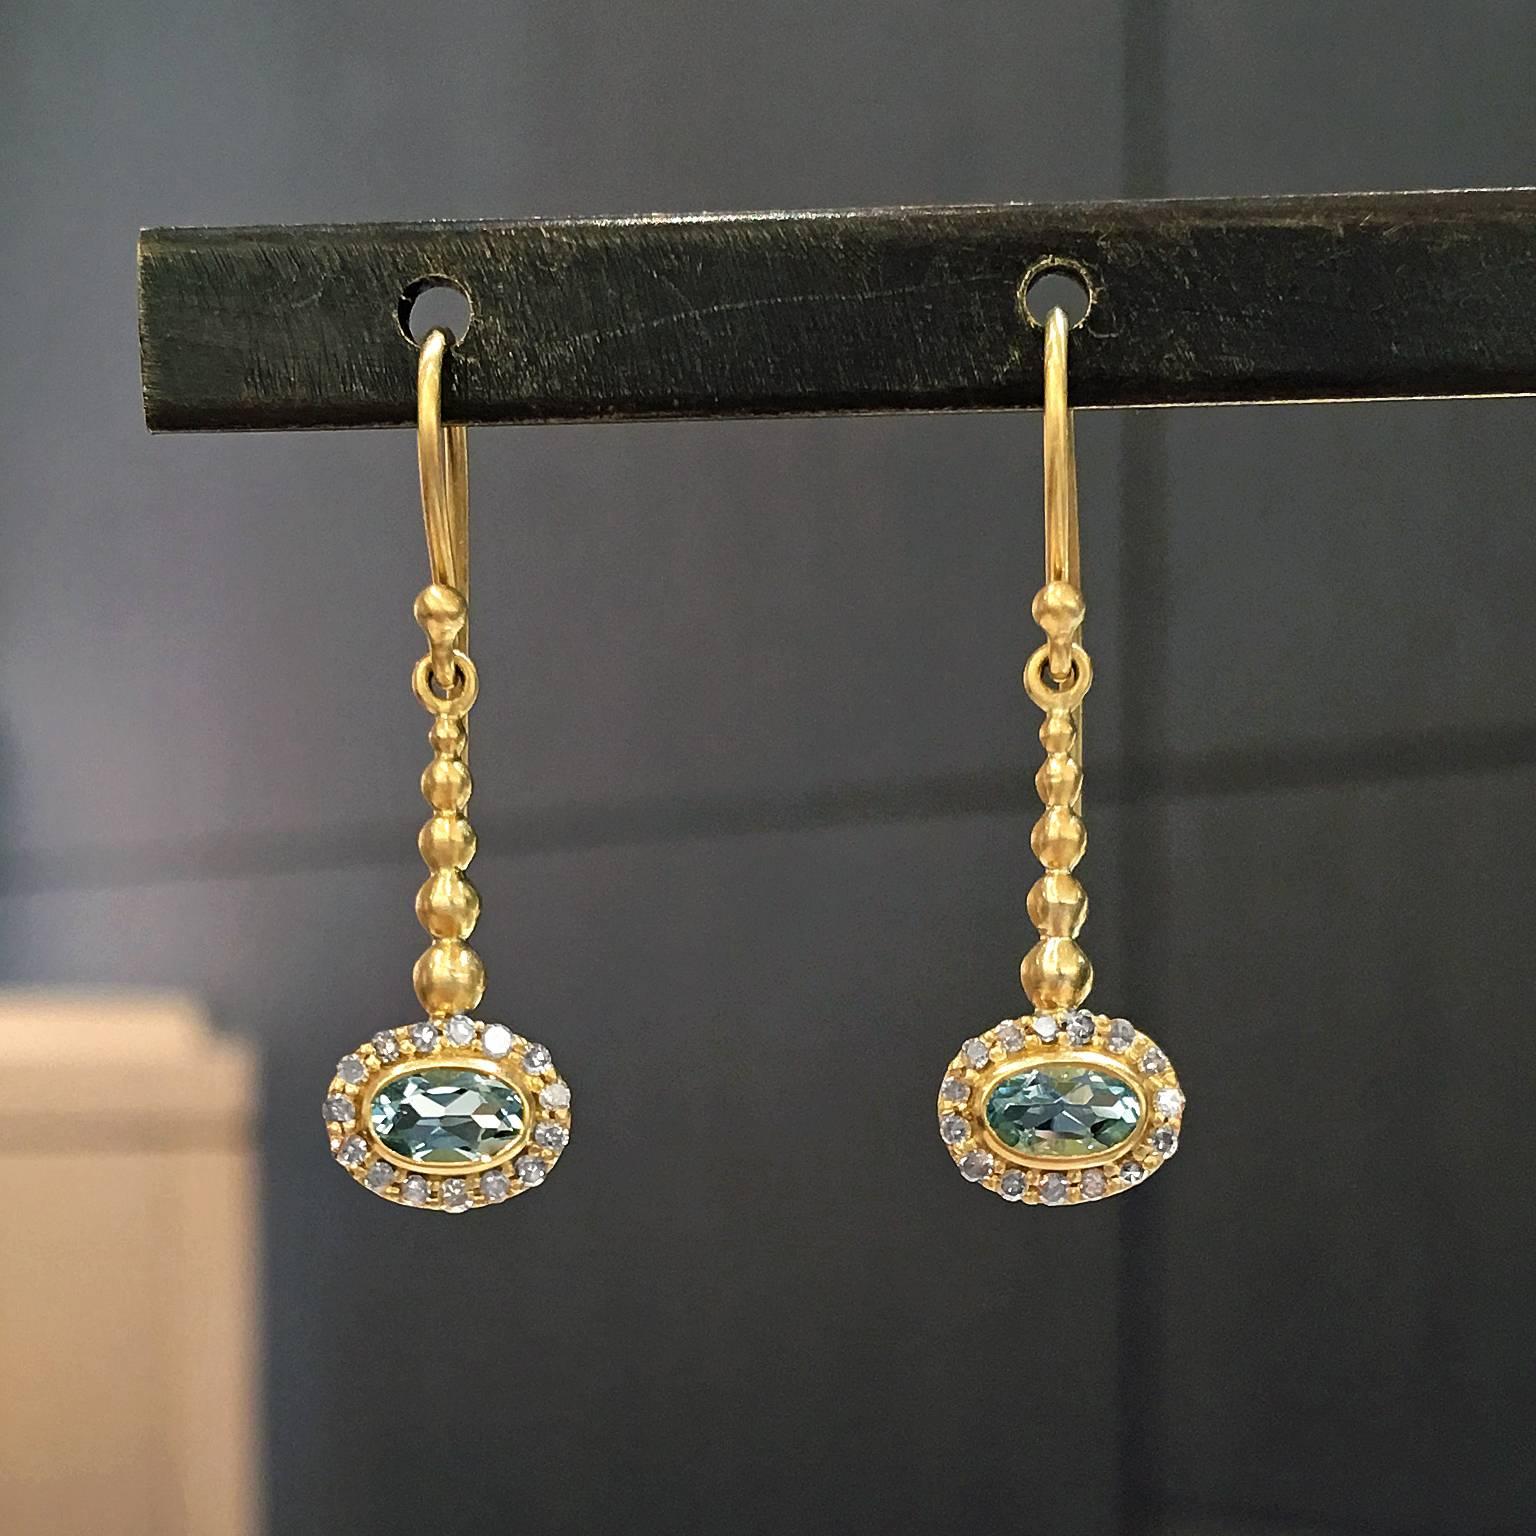 One of a Kind Pendulum Earrings handcrafted by jewelry designer Tej Kothari in matte-finished 18k yellow gold with two greenish-blue oval faceted aquamarines bezel-set and surrounded with 0.16 carats of shimmering diamonds.